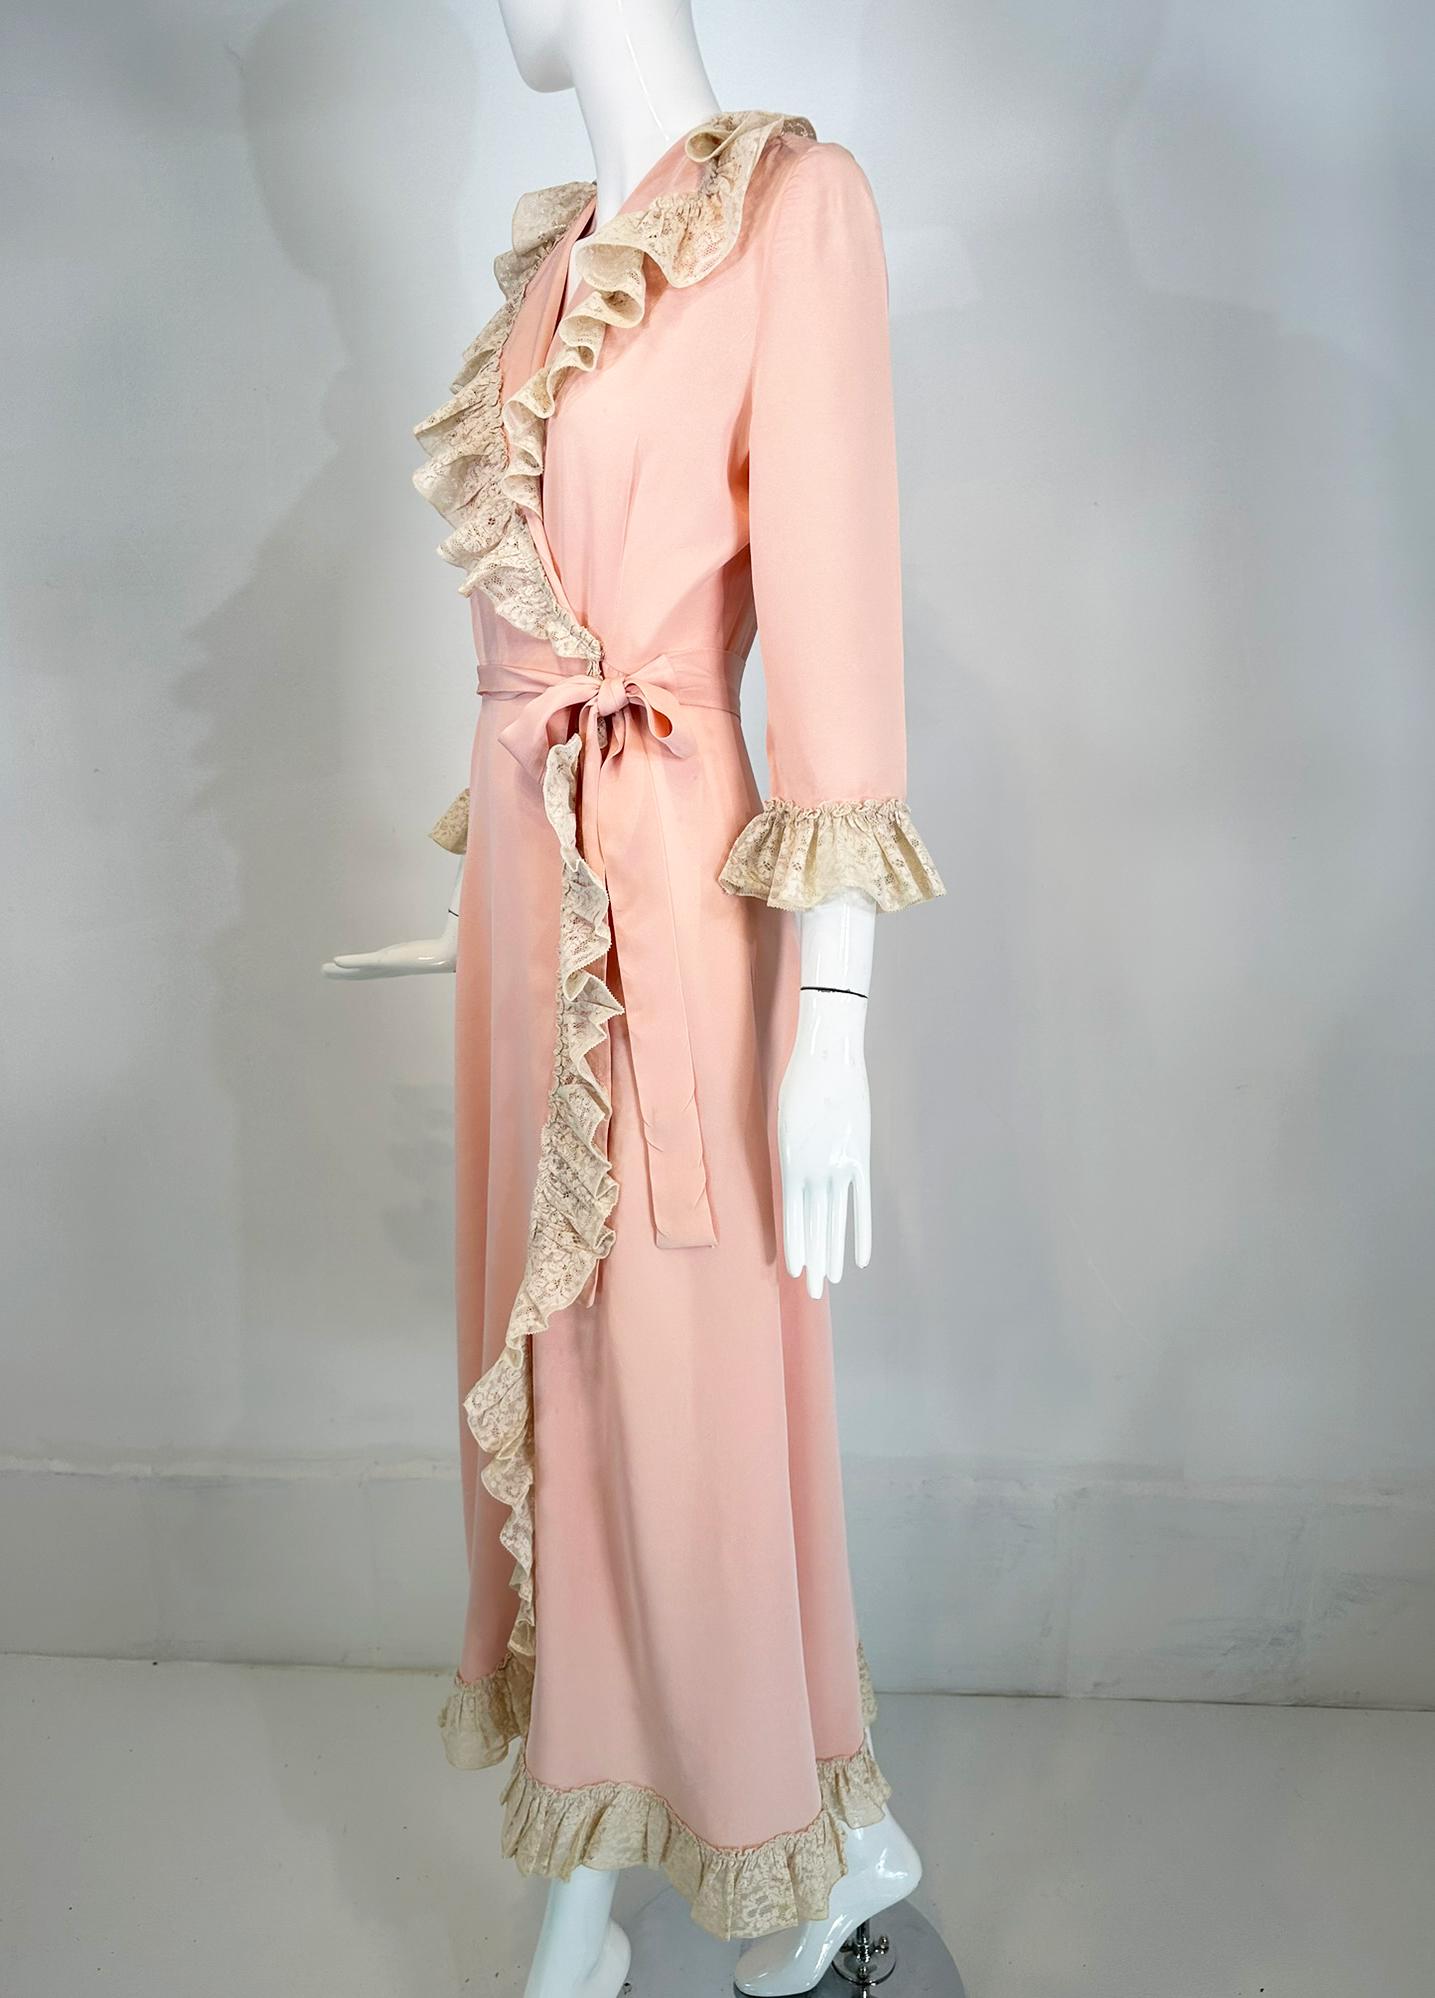 Women's 1930s-40s Pink Rayon Cream Lace Trimmed Wrap & Tie Robe For Sale